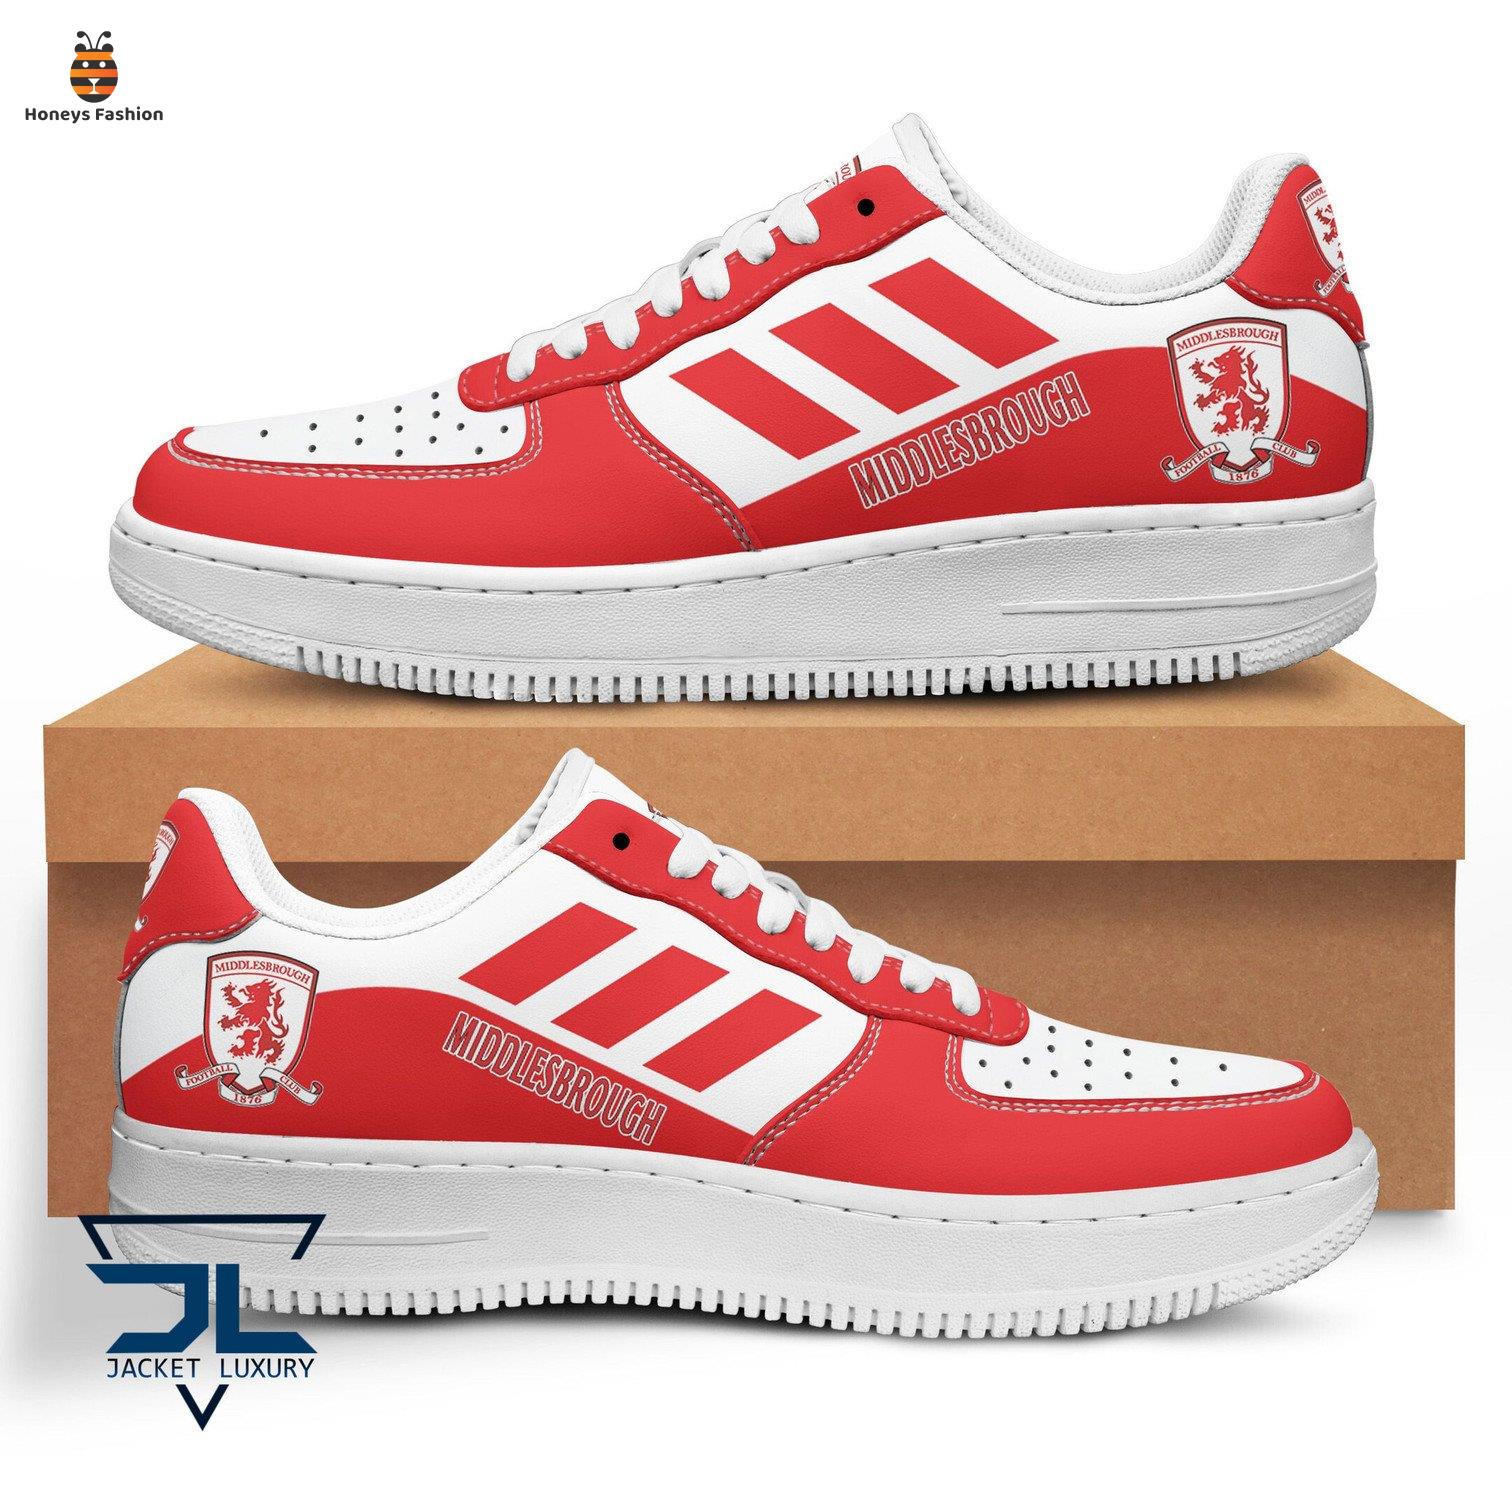 Middlesbrough F.C air force 1 shoes